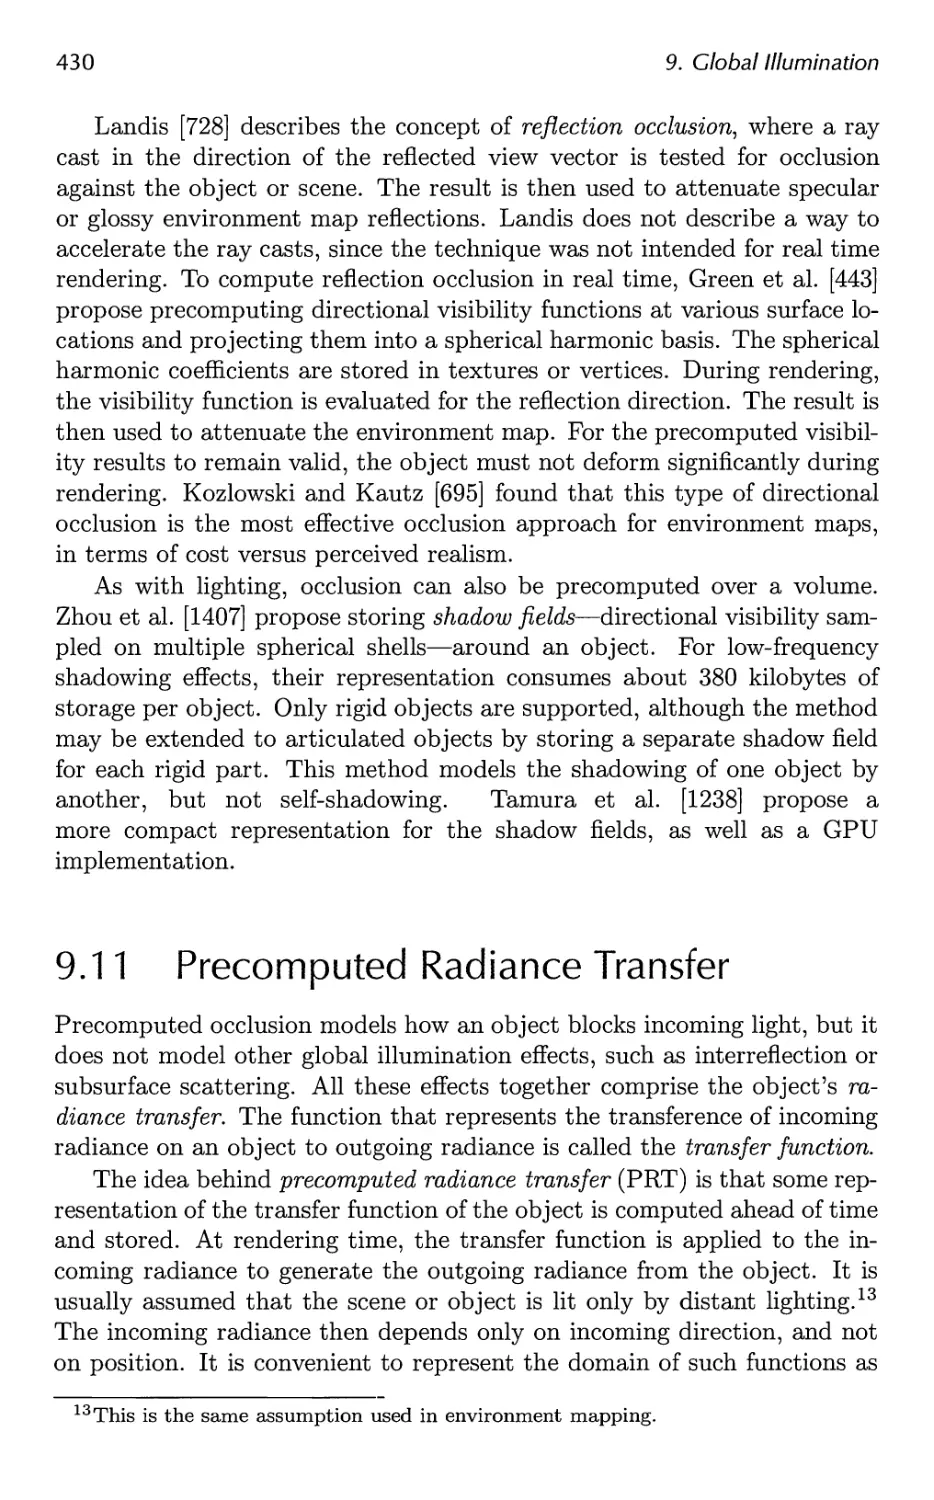 9.11 Precomputed Radiance Transfer